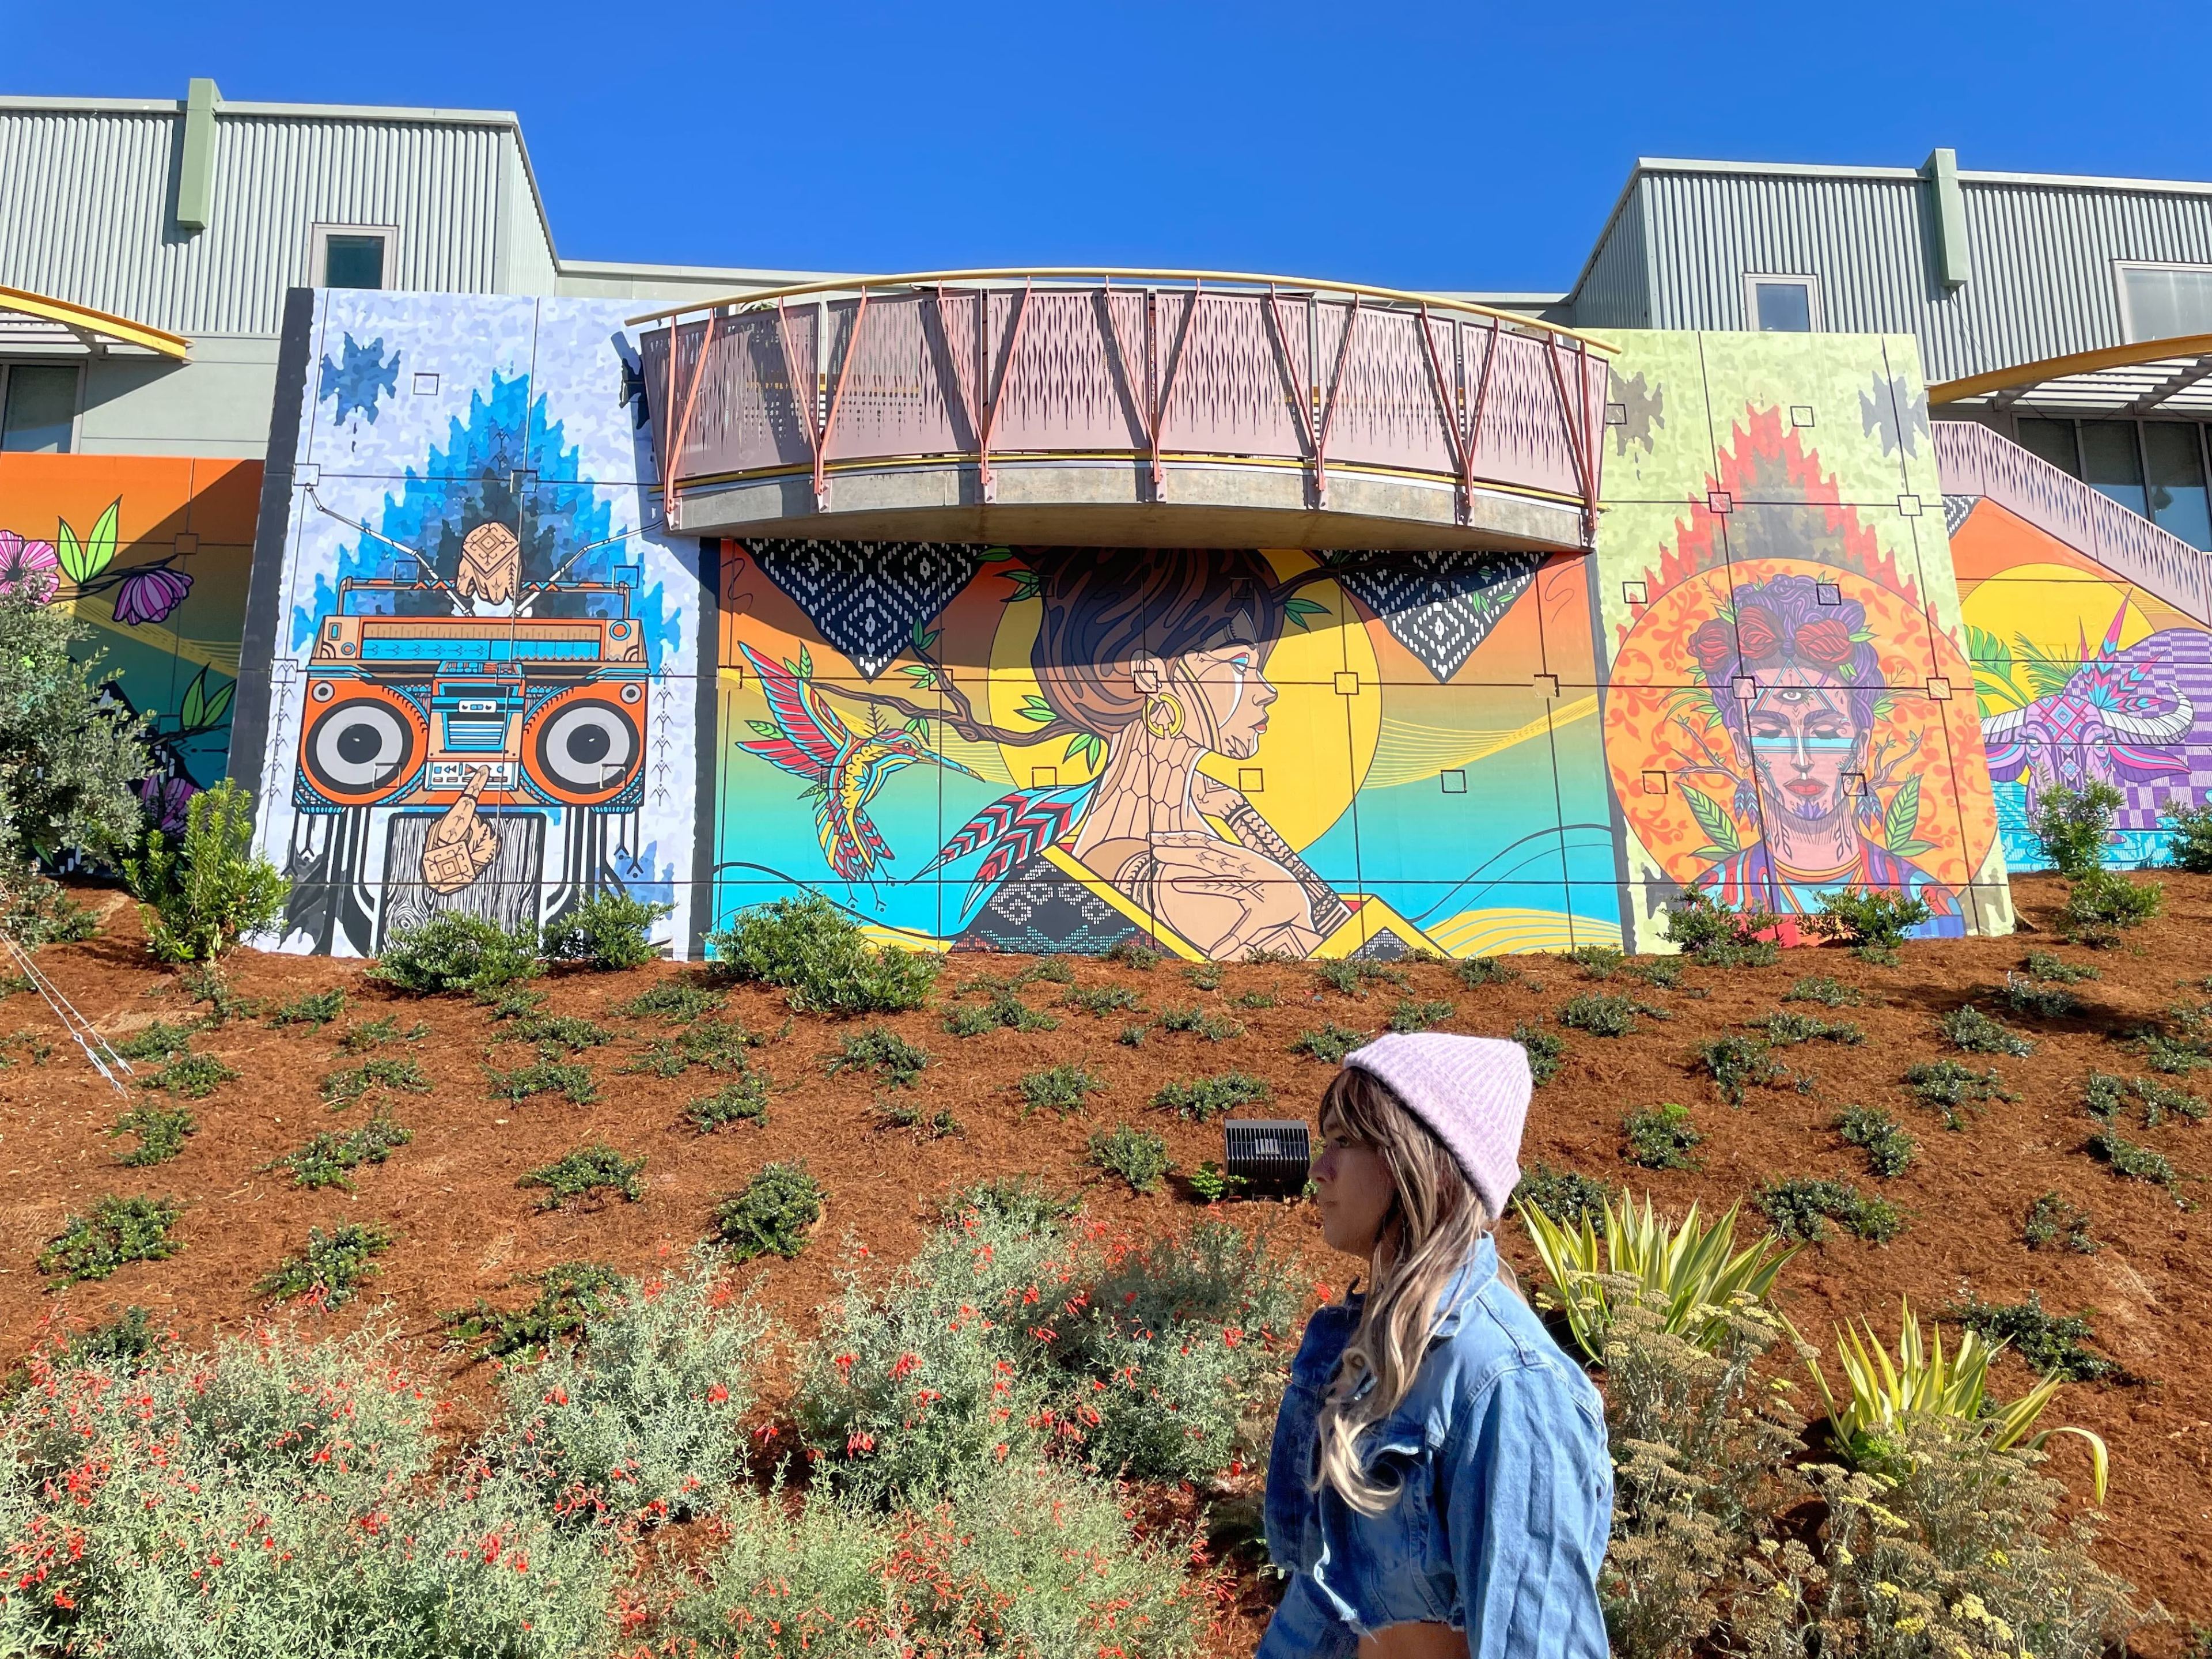 A woman in profile walks to the left in front of an embankment covered in wood chips with low-lying shrubs planted sparsely throughout it. Behind the embankment is a mural depicting, from left to right, a boombox, a woman's face in profile with stylized feathers next to it, and a woman with flowers in her hair and other designs facing the viewer.